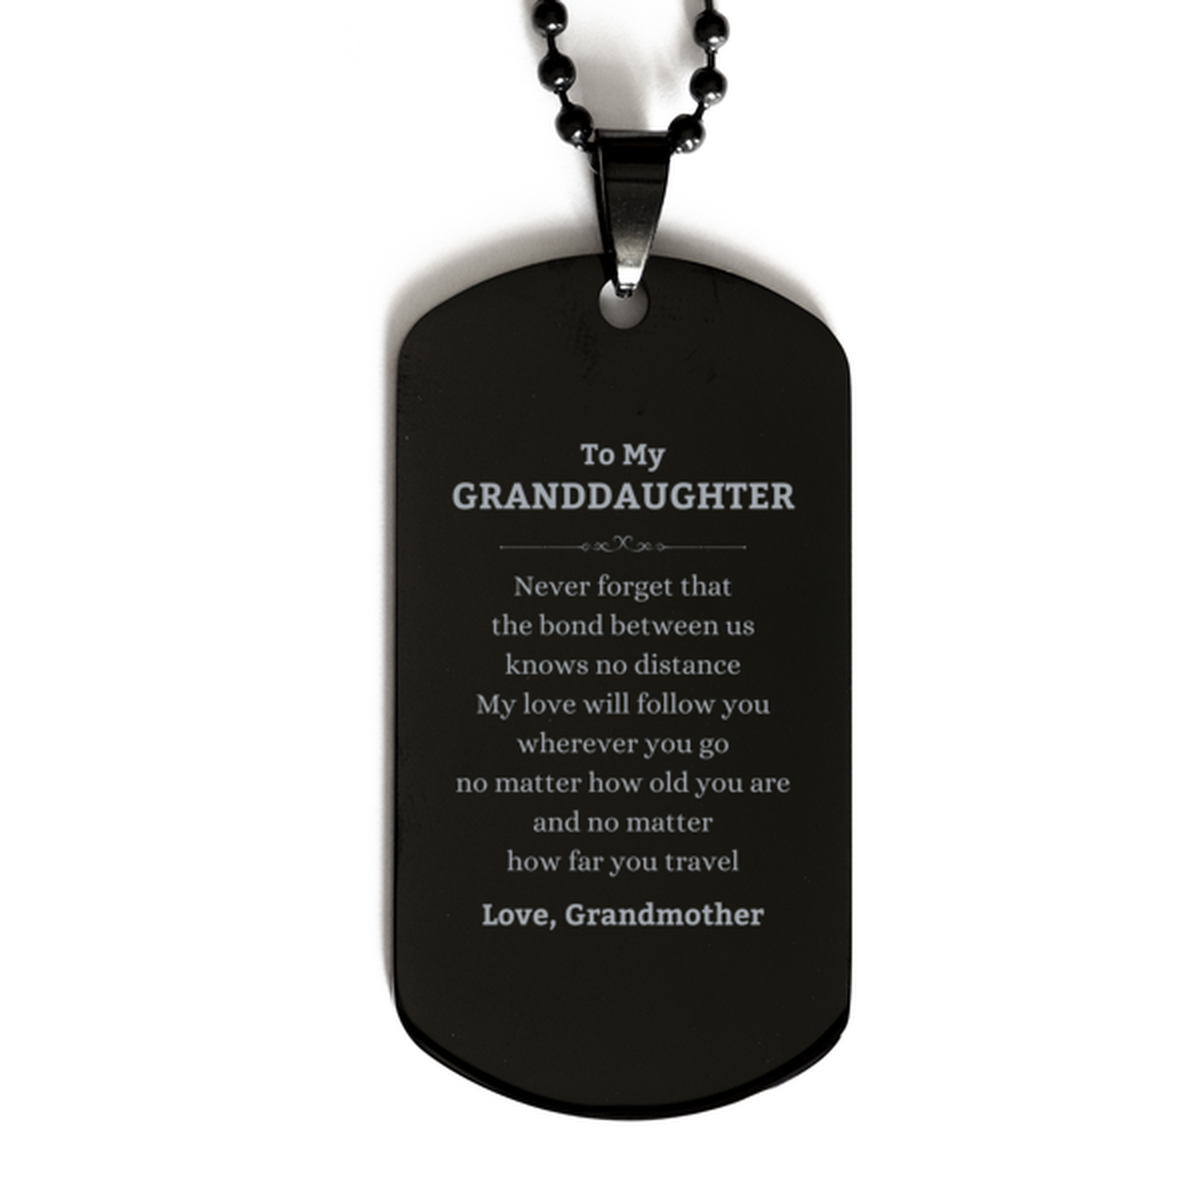 Granddaughter Birthday Gifts from Grandmother, Adjustable Black Dog Tag for Granddaughter Christmas Graduation Unique Gifts Granddaughter Never forget that the bond between us knows no distance. Love, Grandmother